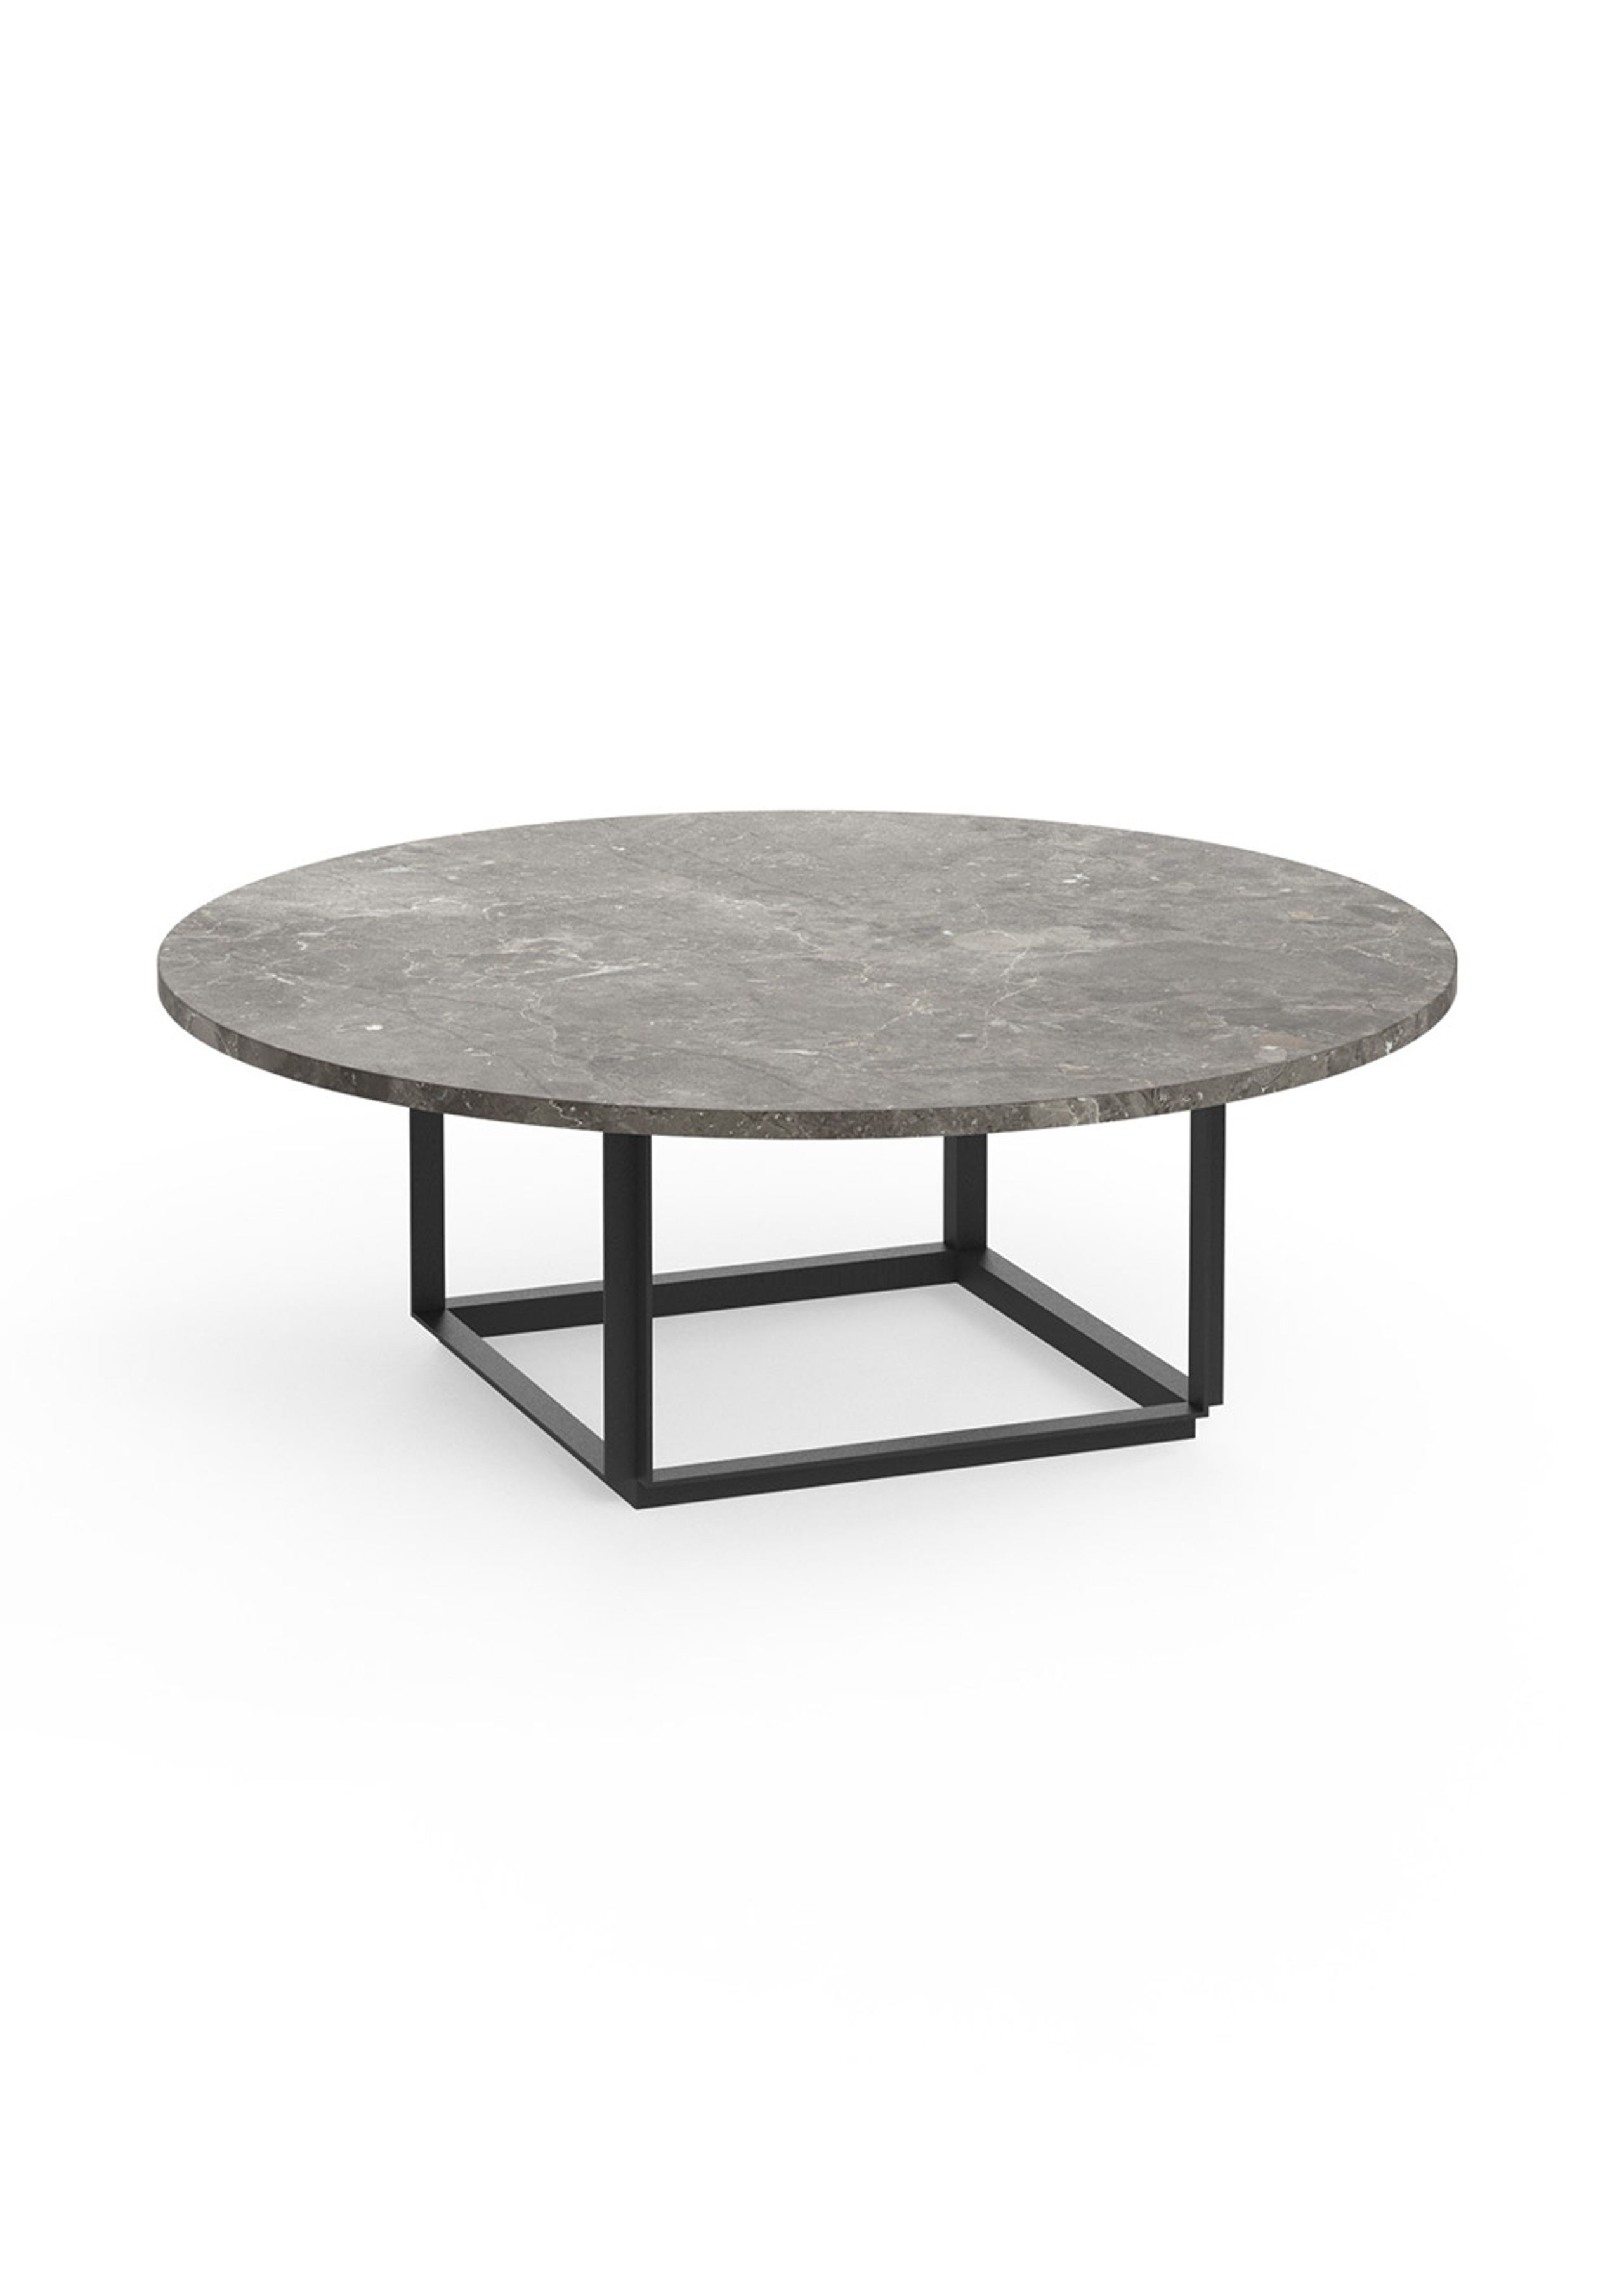 New Works - Table basse - Florence Coffee Table - Gris du Marais Marble w. Black Frame